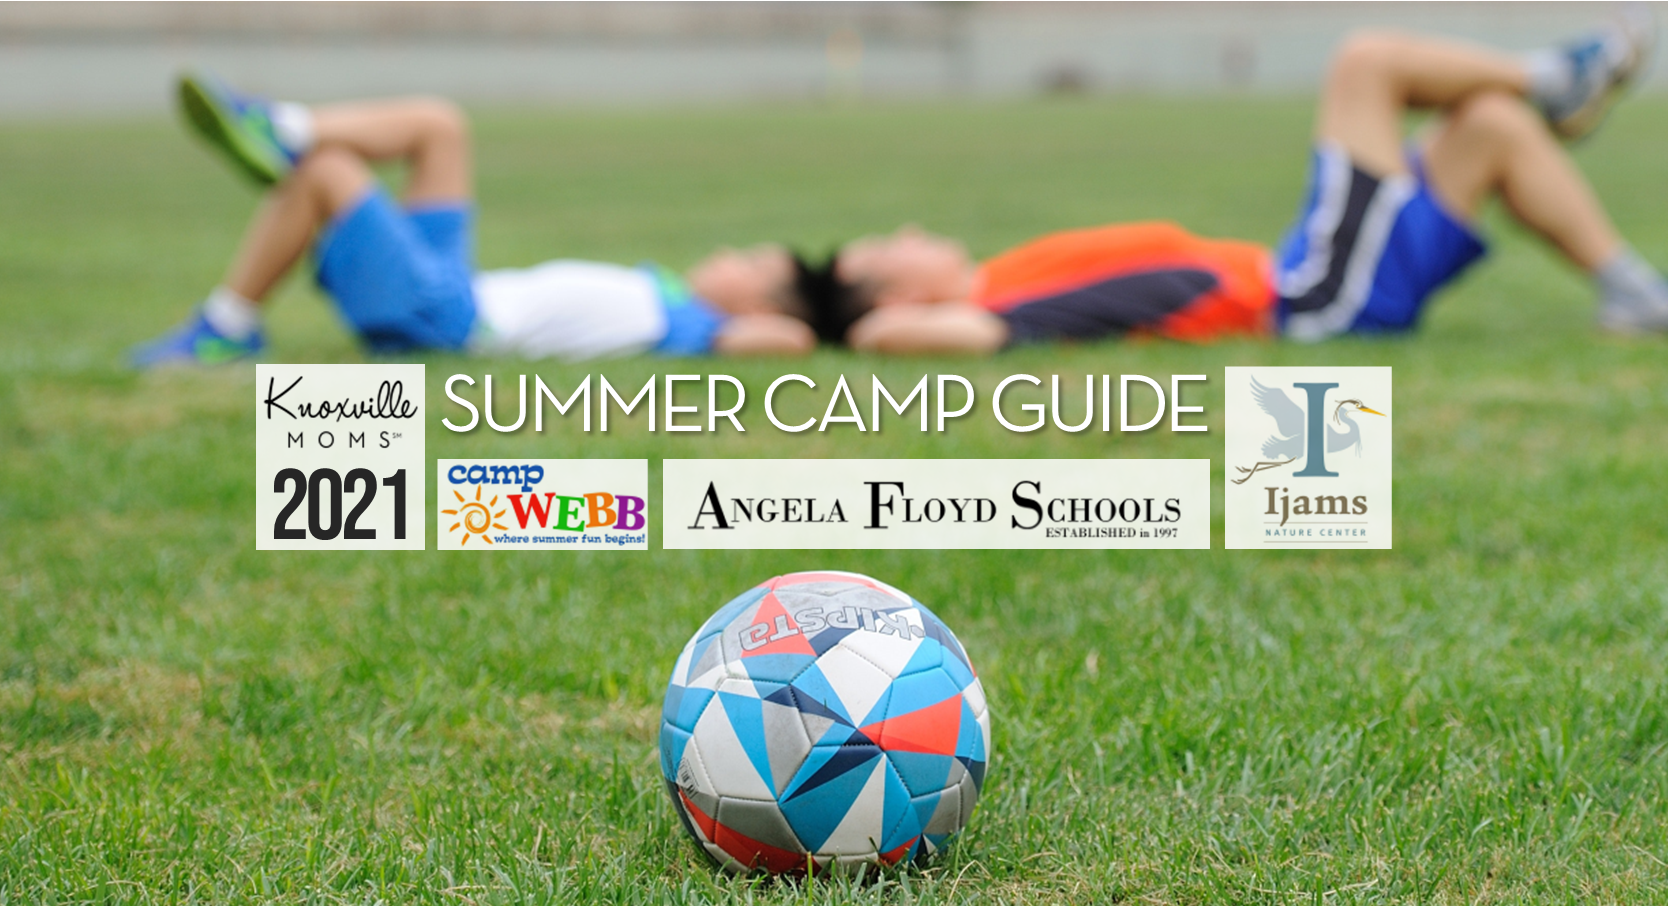 Knoxville Moms Knoxville Summer Camp Guide